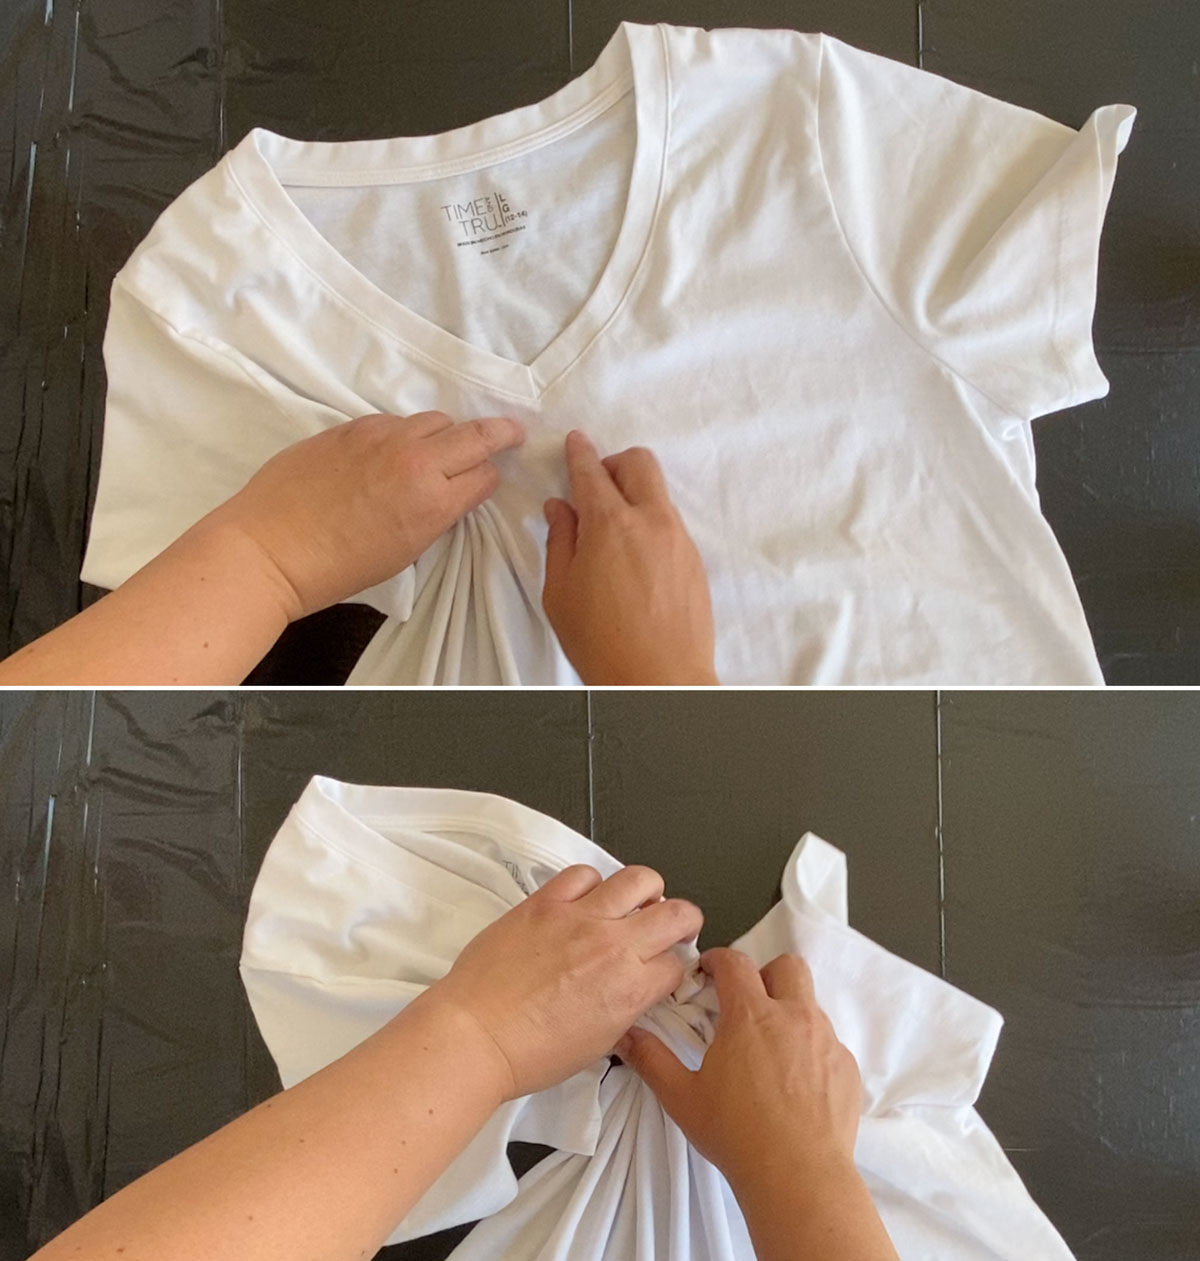 How to apply rubber bands to shirt for tie dye